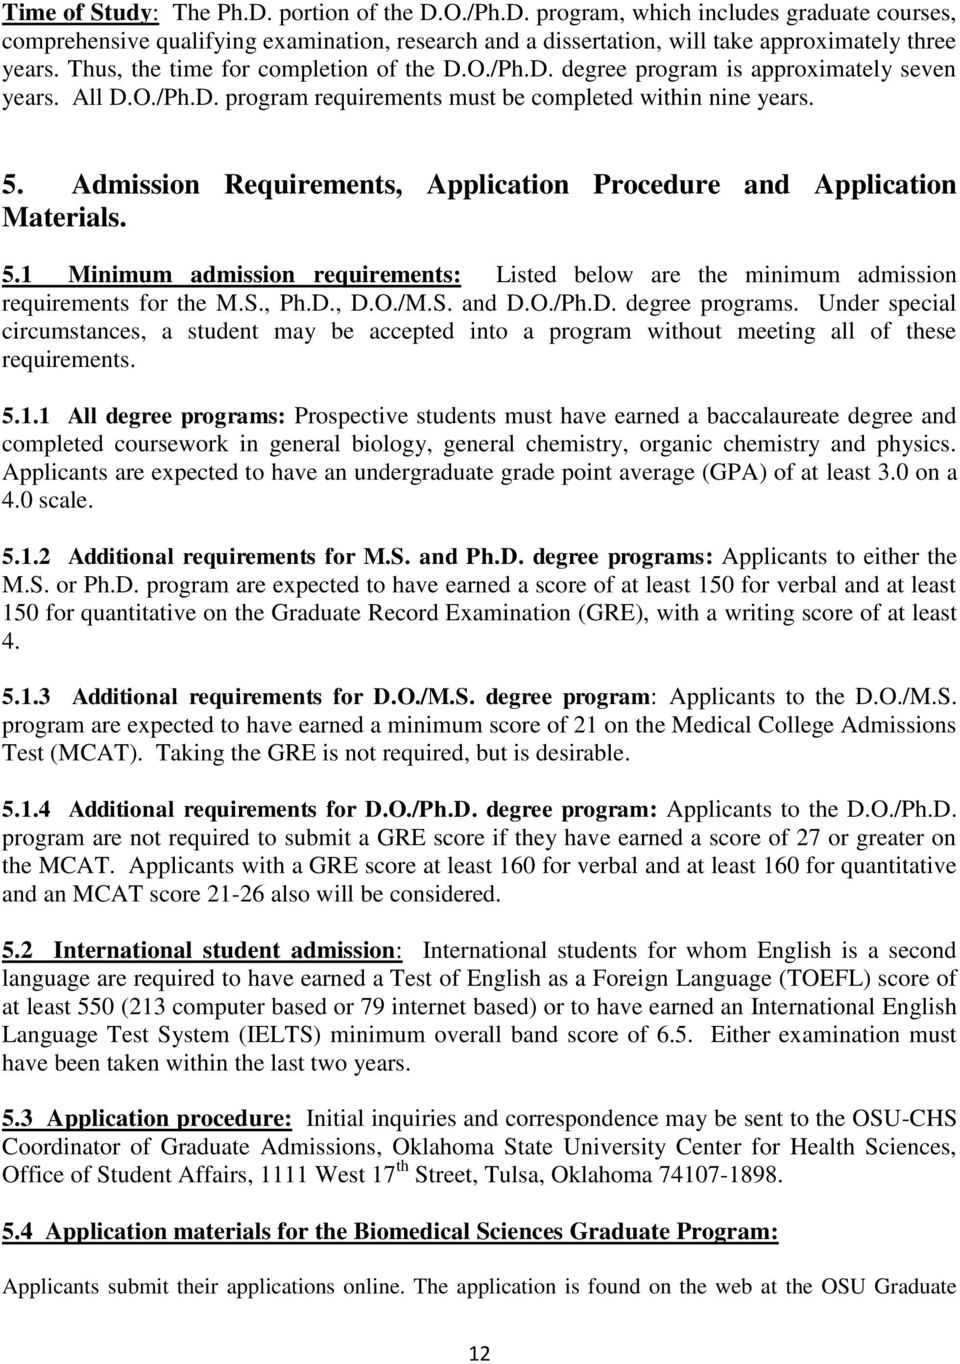 Admission Requirements, Application Procedure and Application Materials. 5.1 Minimum admission requirements: Listed below are the minimum admission requirements for the M.S., Ph.D., D.O./M.S. and D.O./Ph.